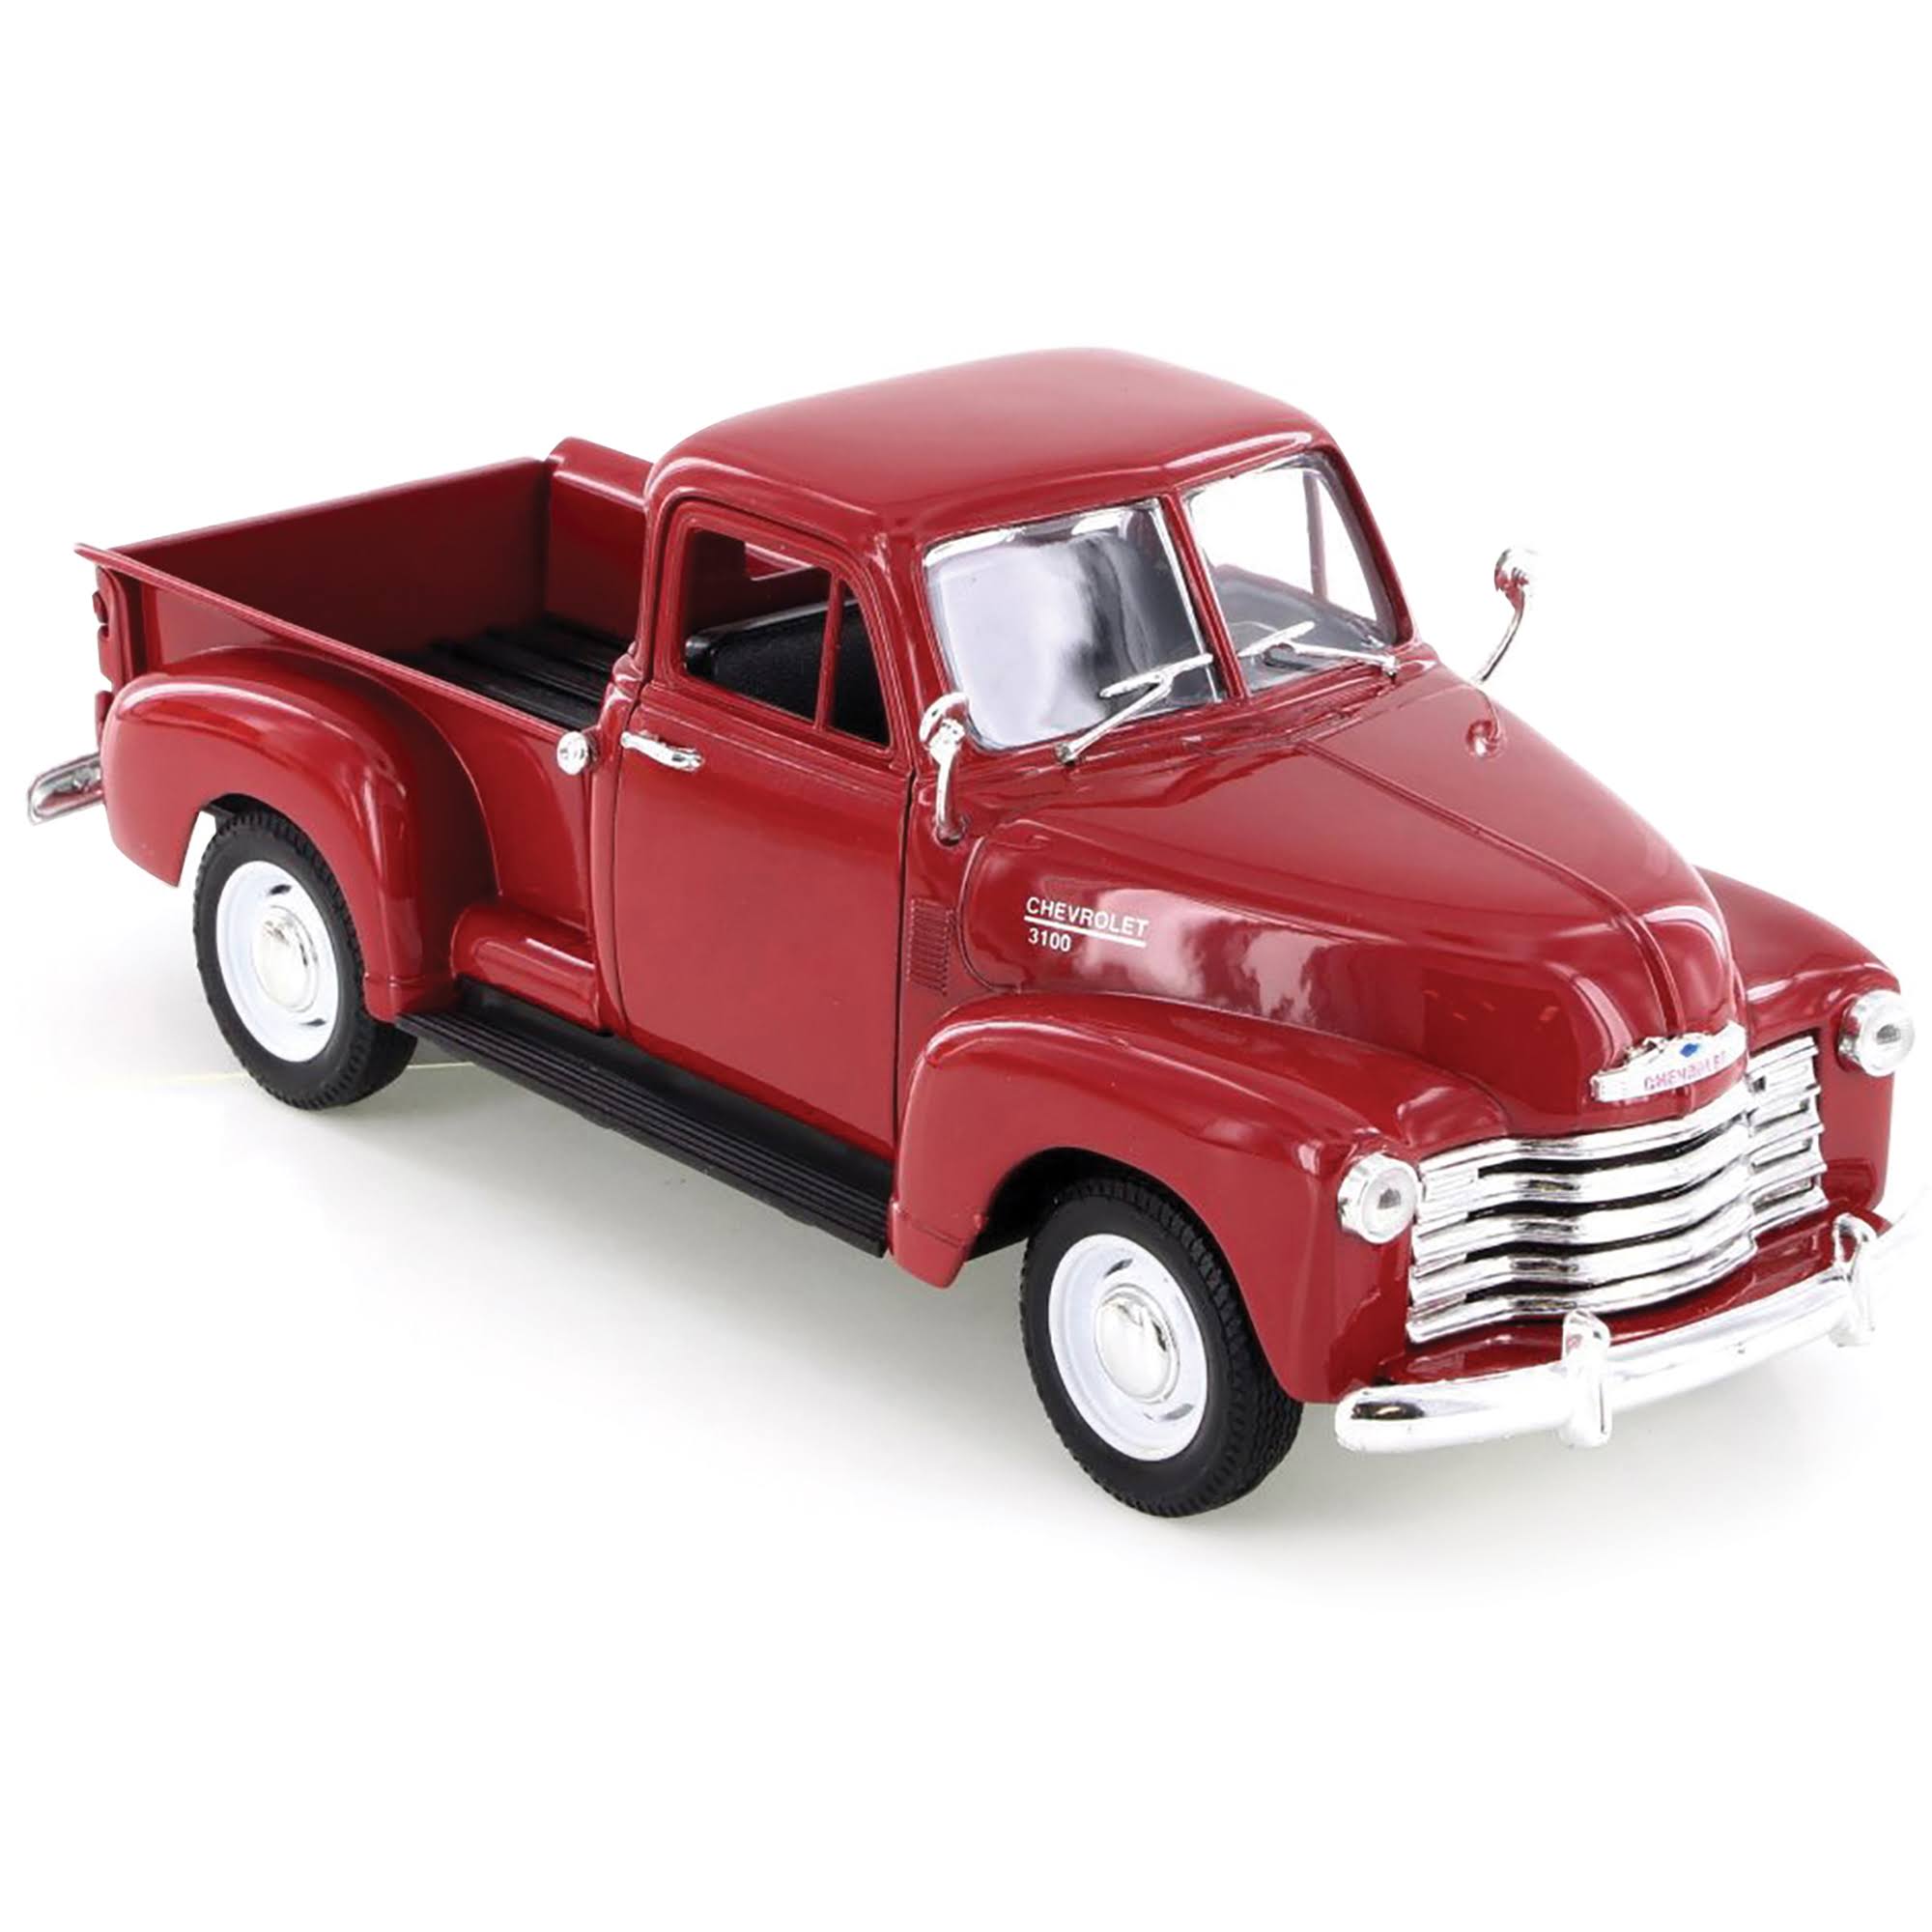 1953 Chevy 3100 Pickup 1:24 Scale Diecast Model by Welly